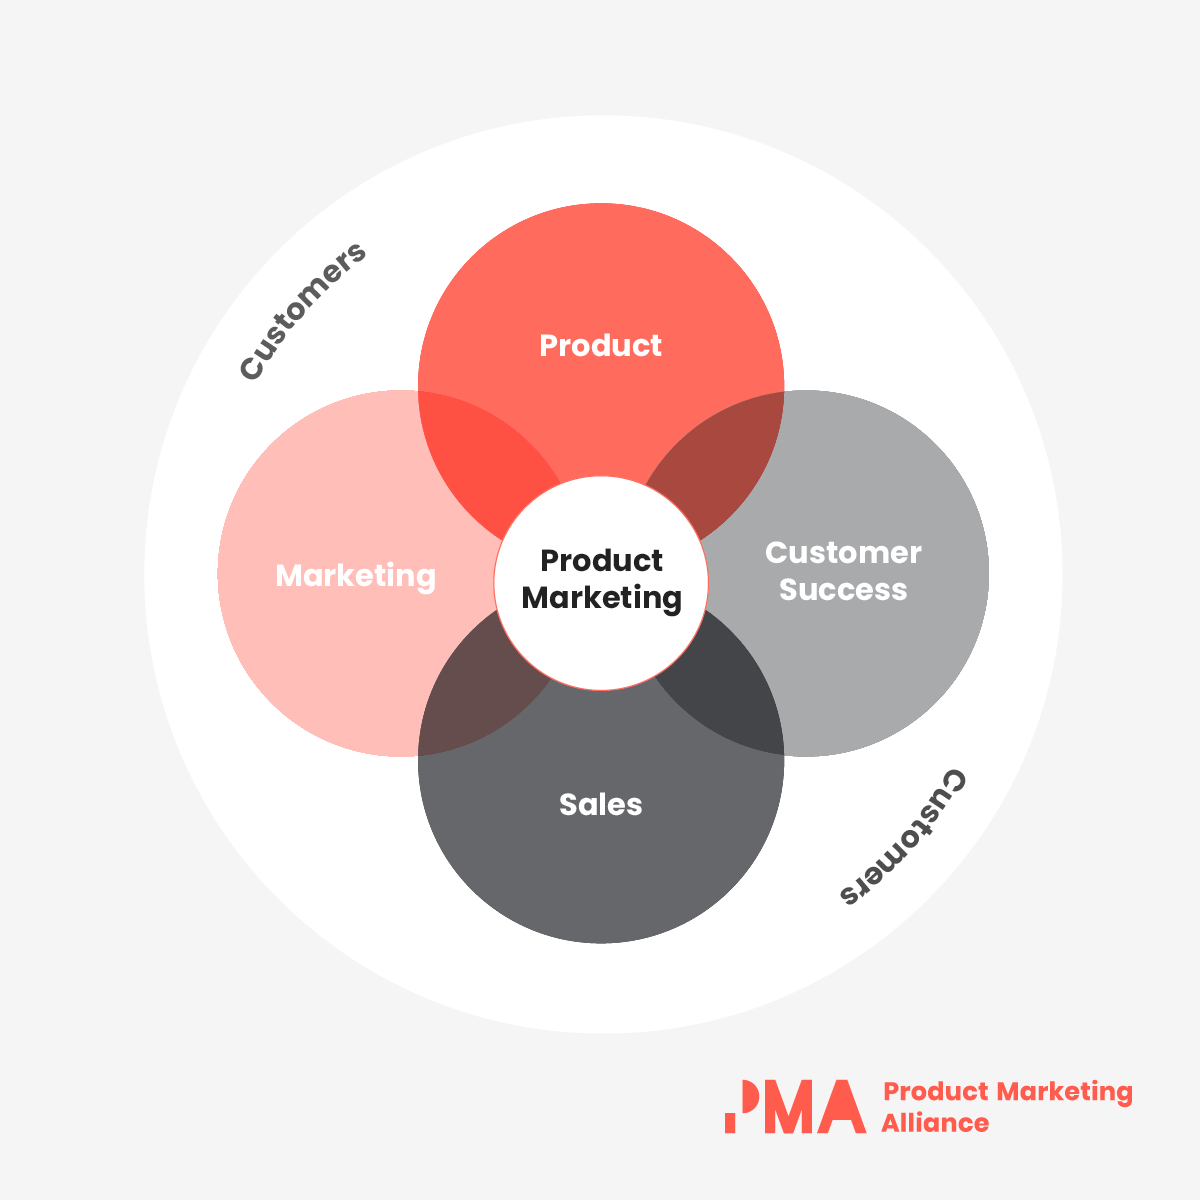 Product Marketing Alliance explains what product marketing is in 6 simple areas